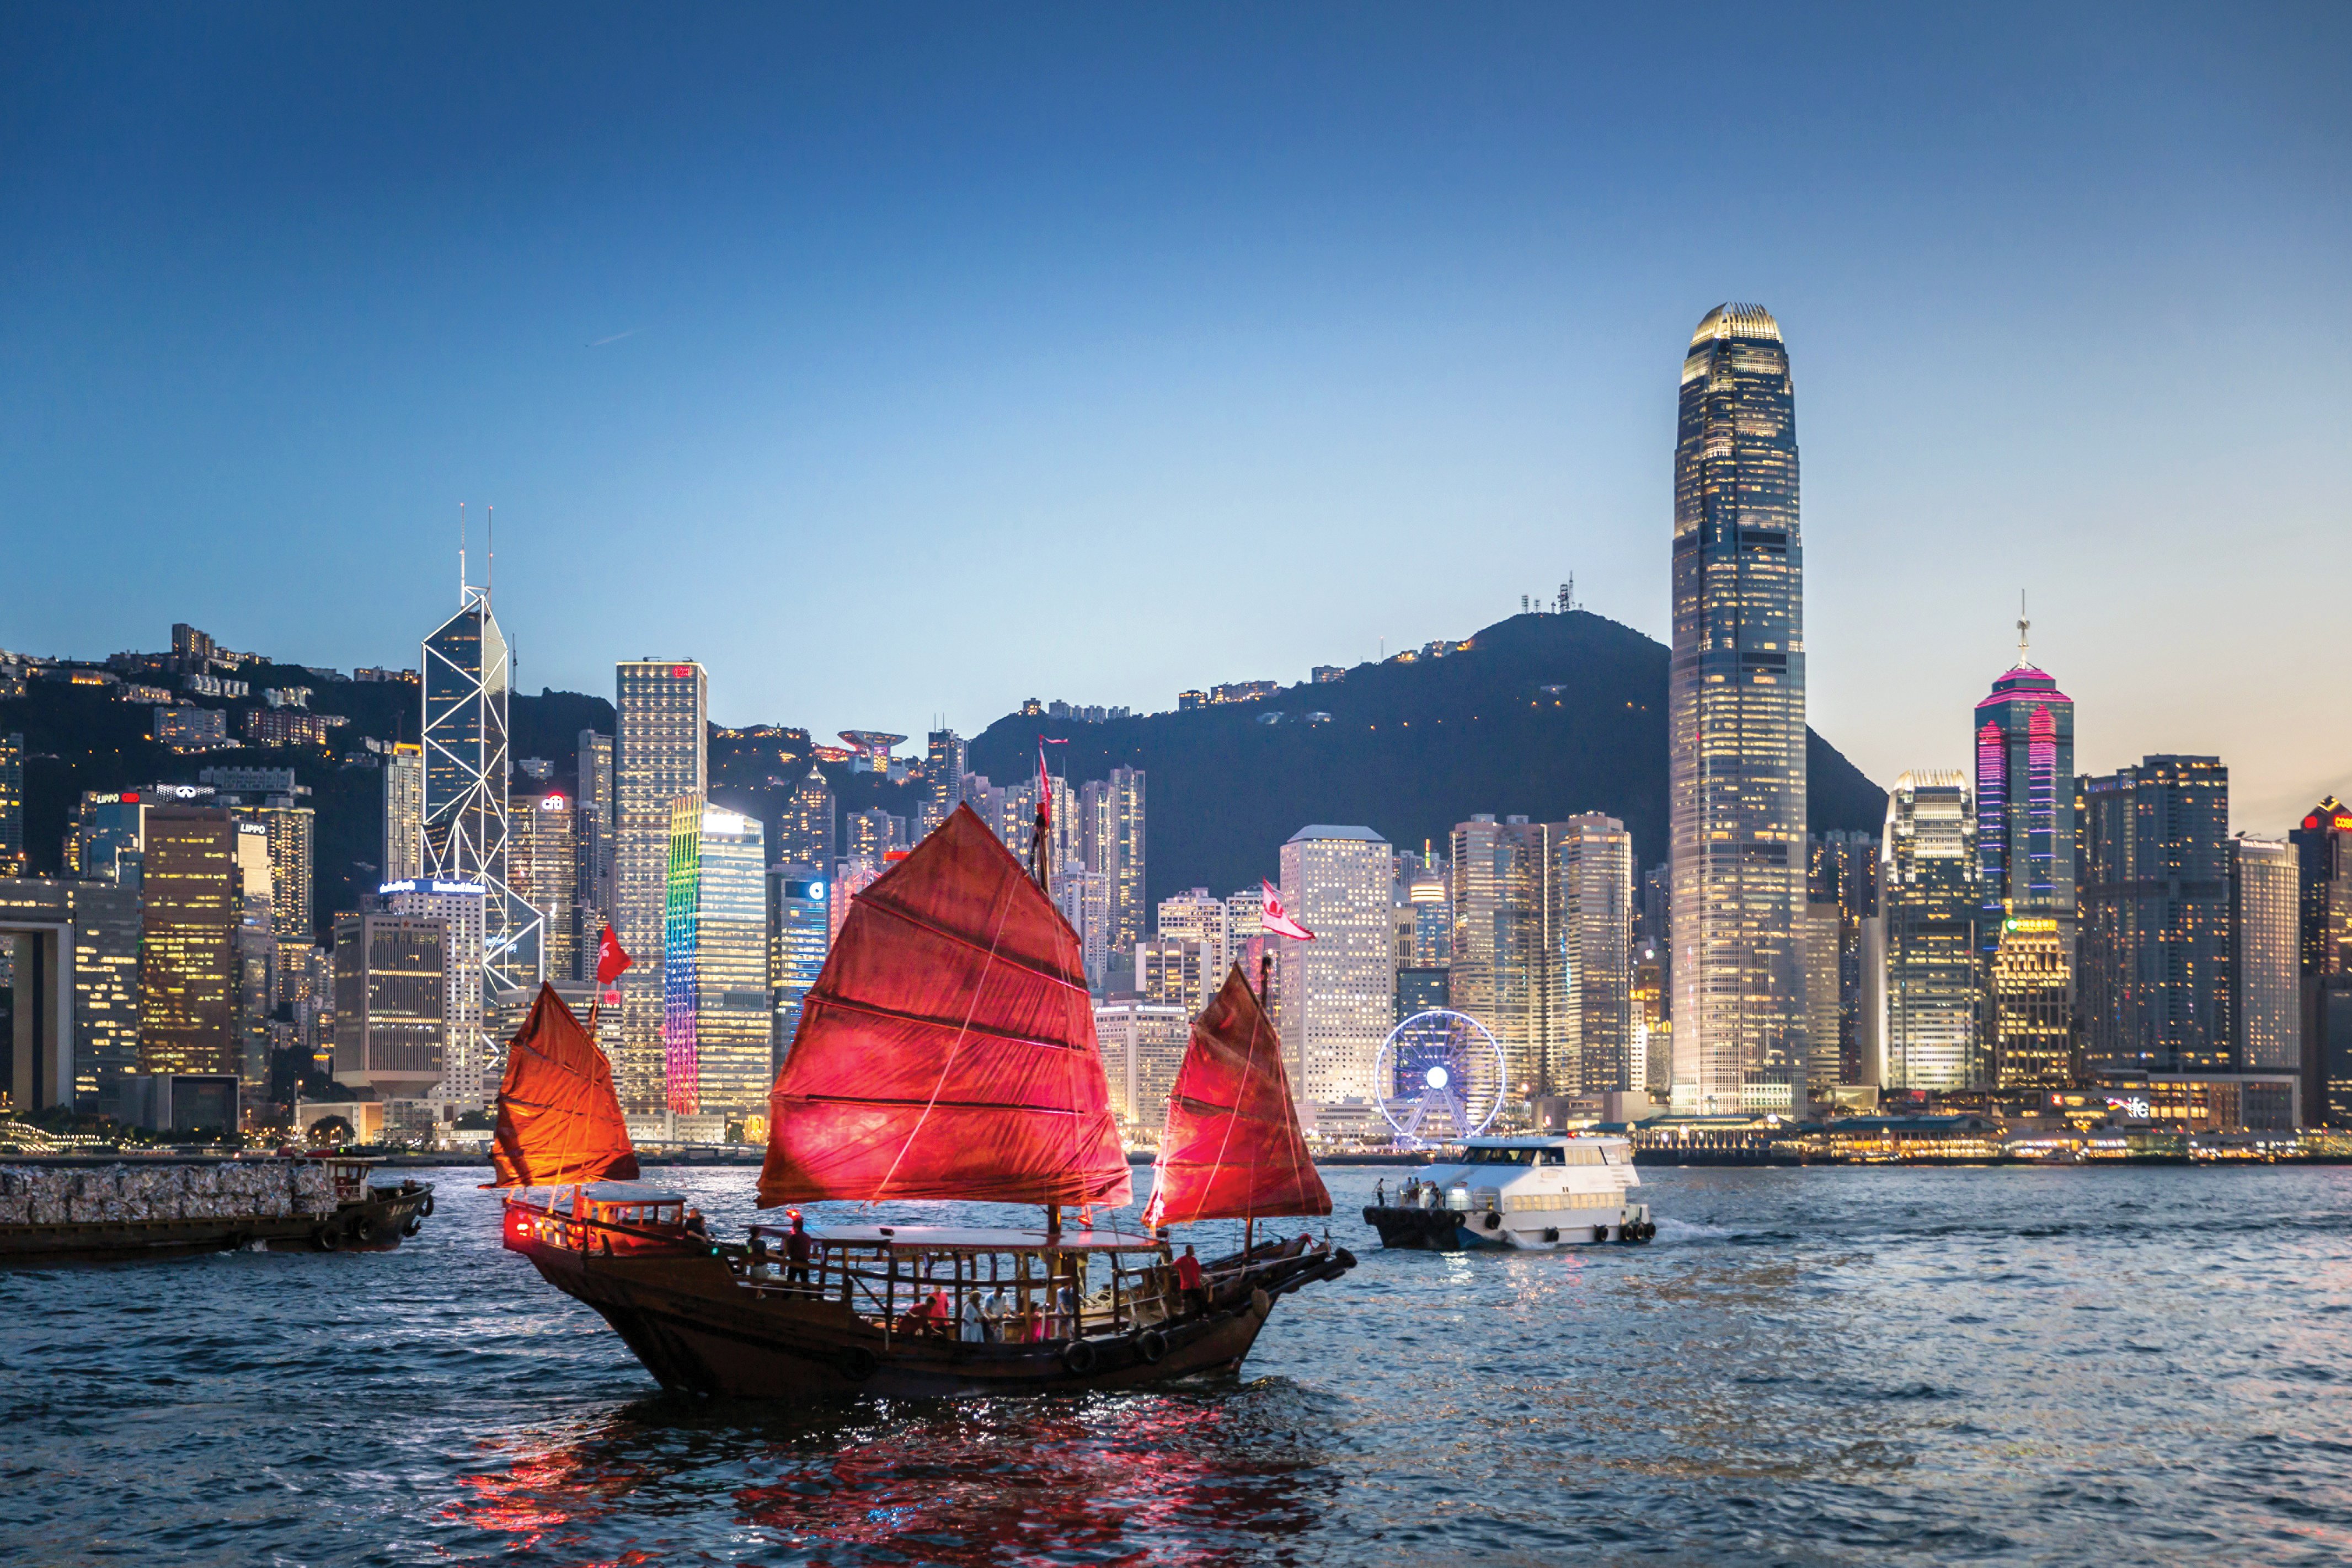 Dukling, the only original antique Chinese Junk boat in Hong Kong, has been offering sightseeing tours on the Victoria Harbour since 2015. Photo: Dukling